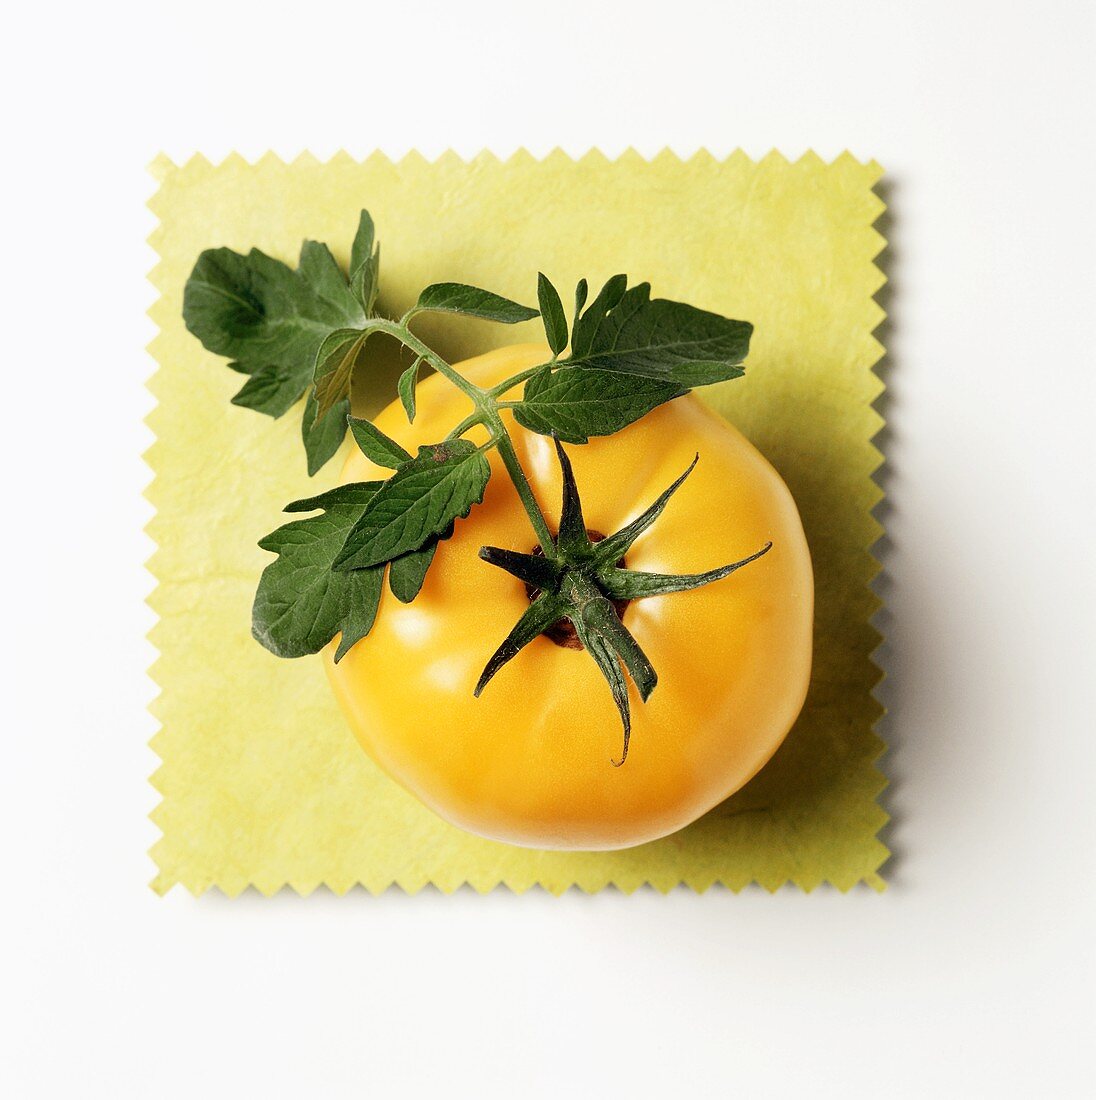 A Yellow Tomato on a Yellow Cloth with Leaves